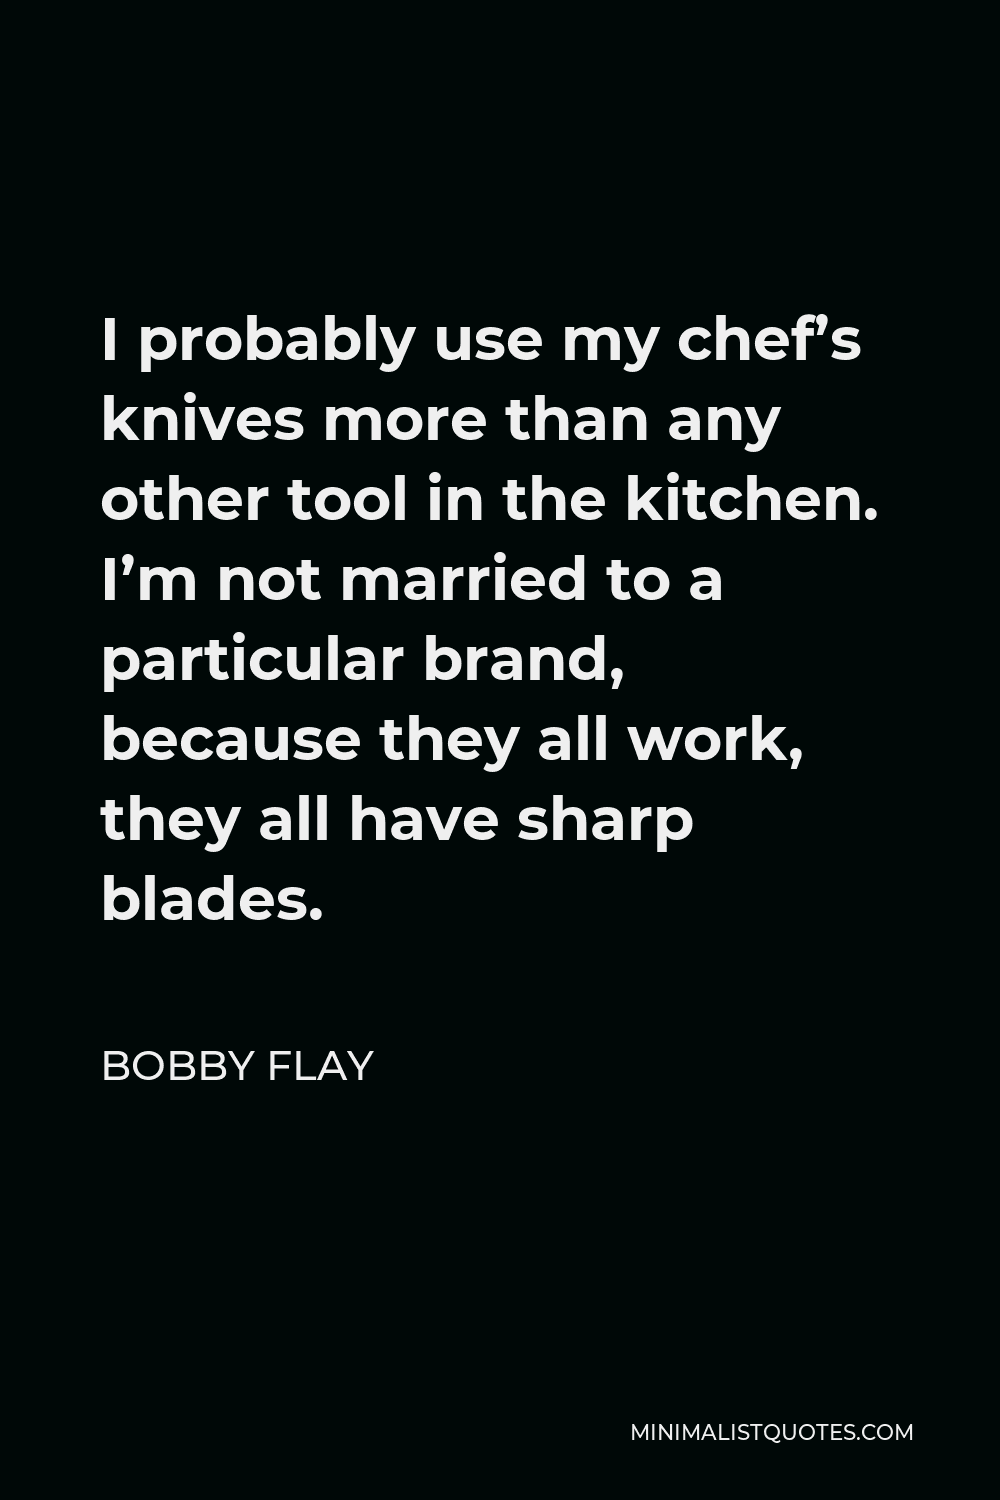 Bobby Flay Quote - I probably use my chef’s knives more than any other tool in the kitchen. I’m not married to a particular brand, because they all work, they all have sharp blades.